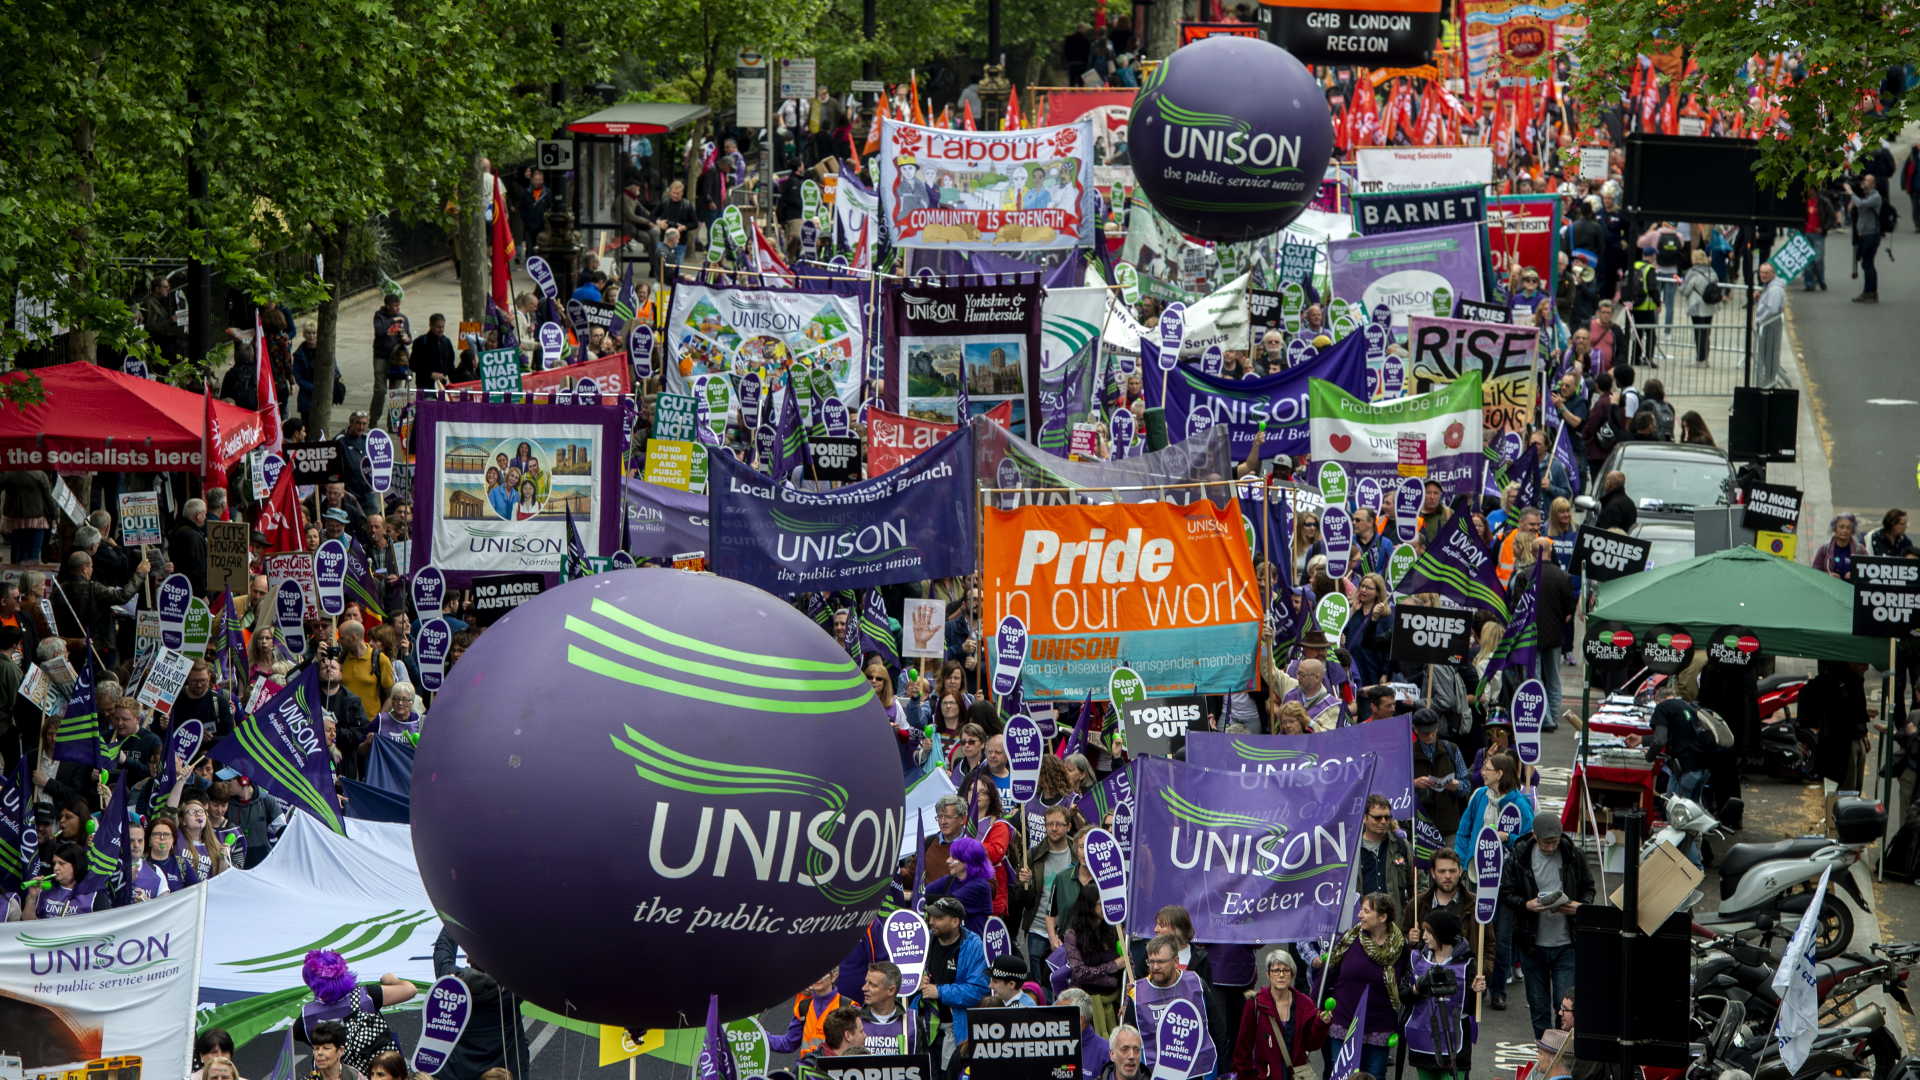 epa06730213 Demonstrators take part in the 'A New Deal for Working People' march organised by the Trade Union Congress (TUC) in central London, Britain, 12 May 2018. The mass demonstration was organised by the Trade Union Congress, to call for better pay and working conditions for public and private sector workers.  EPA/WILL OLIVER